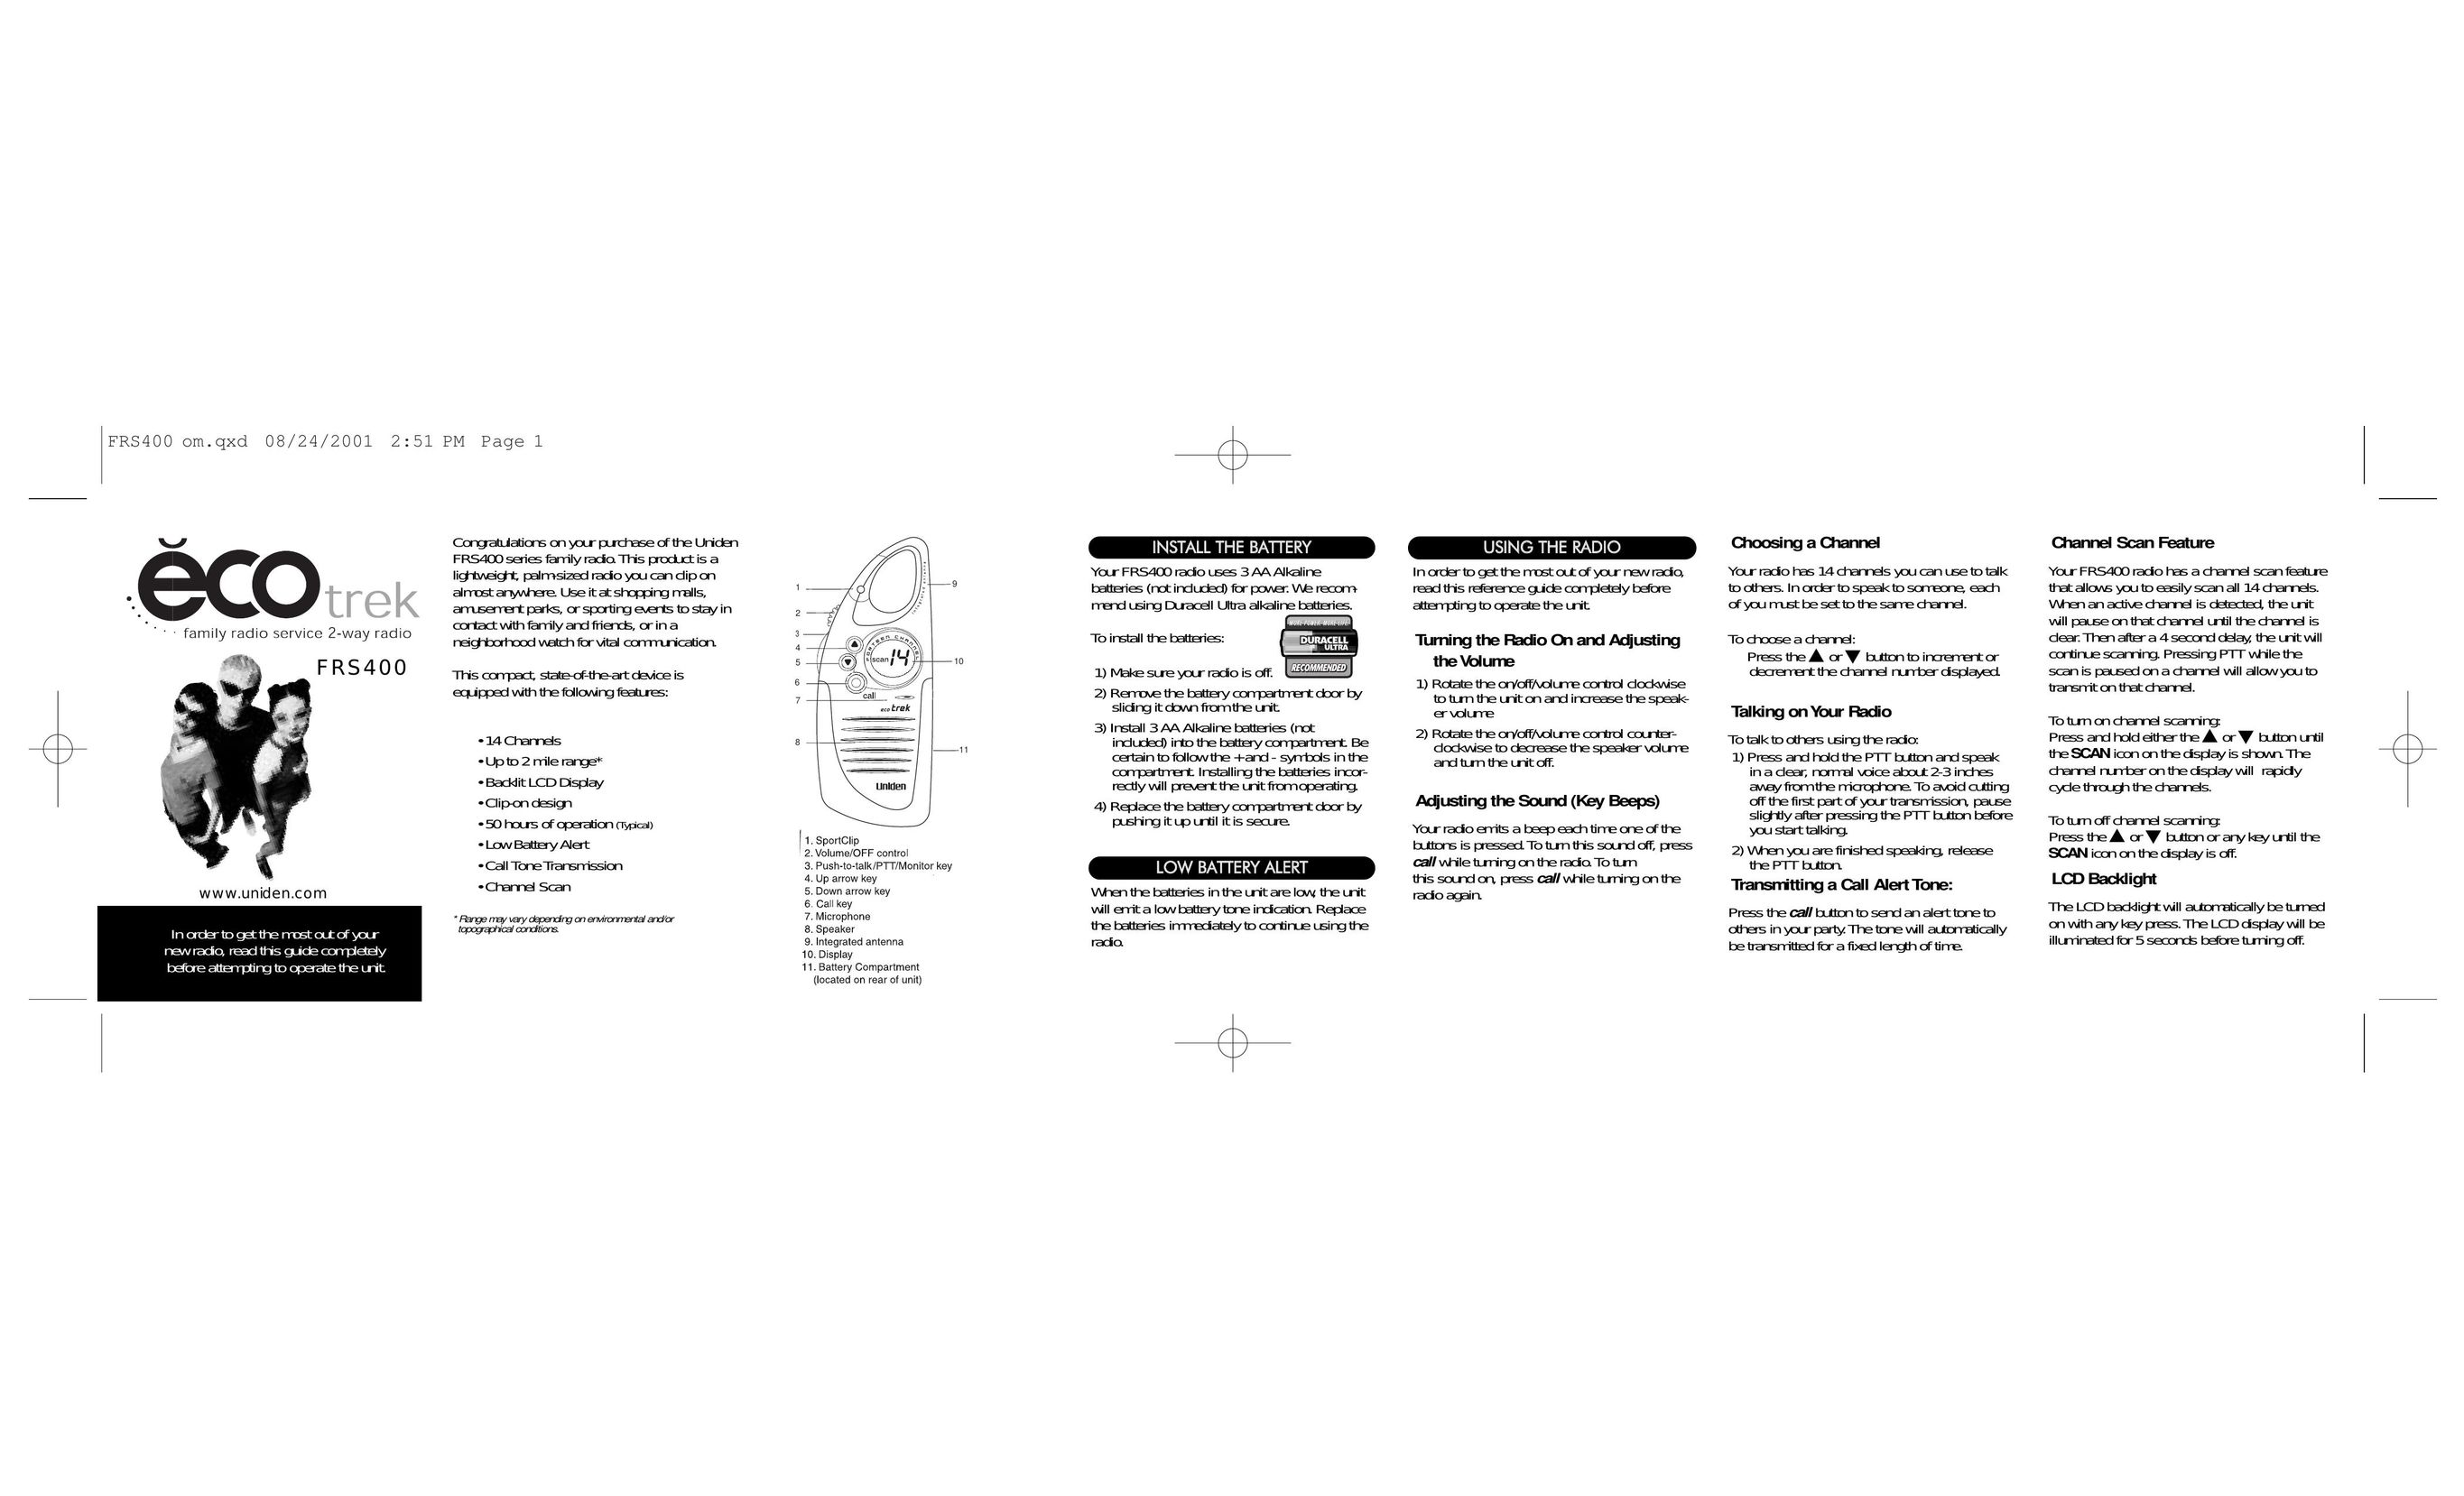 Uniden FRS400 Two-Way Radio User Manual